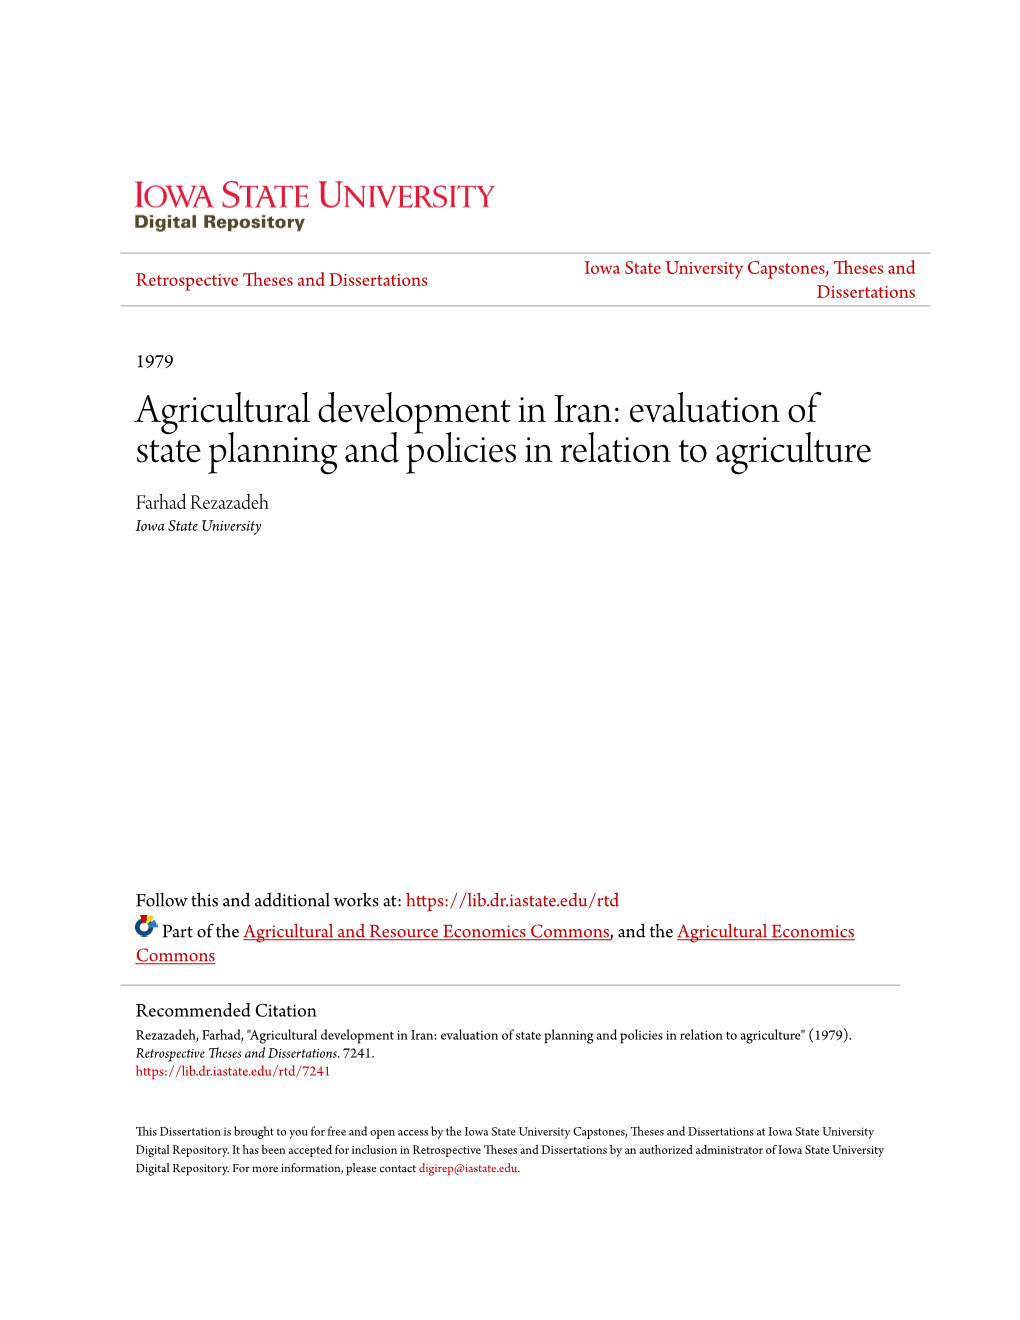 Agricultural Development in Iran: Evaluation of State Planning and Policies in Relation to Agriculture Farhad Rezazadeh Iowa State University